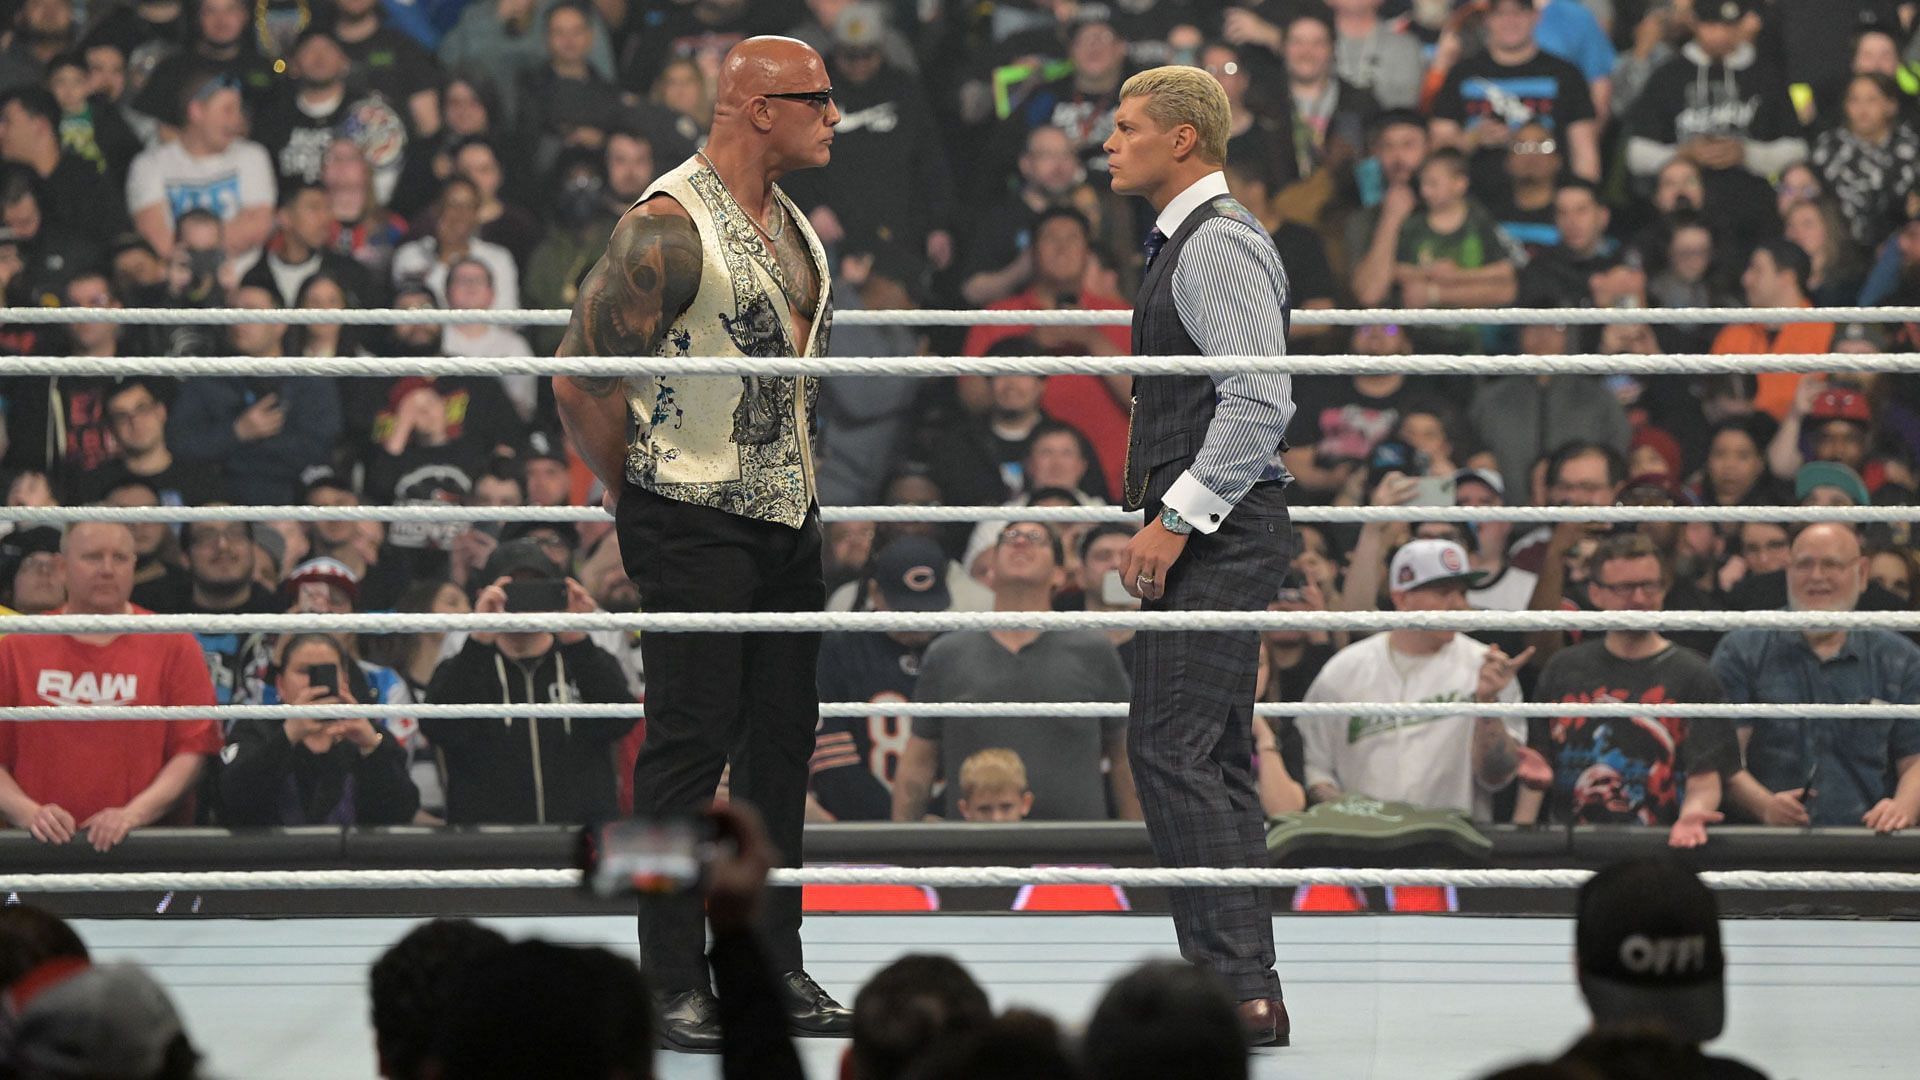 The Rock and Cody Rhodes face off on WWE RAW